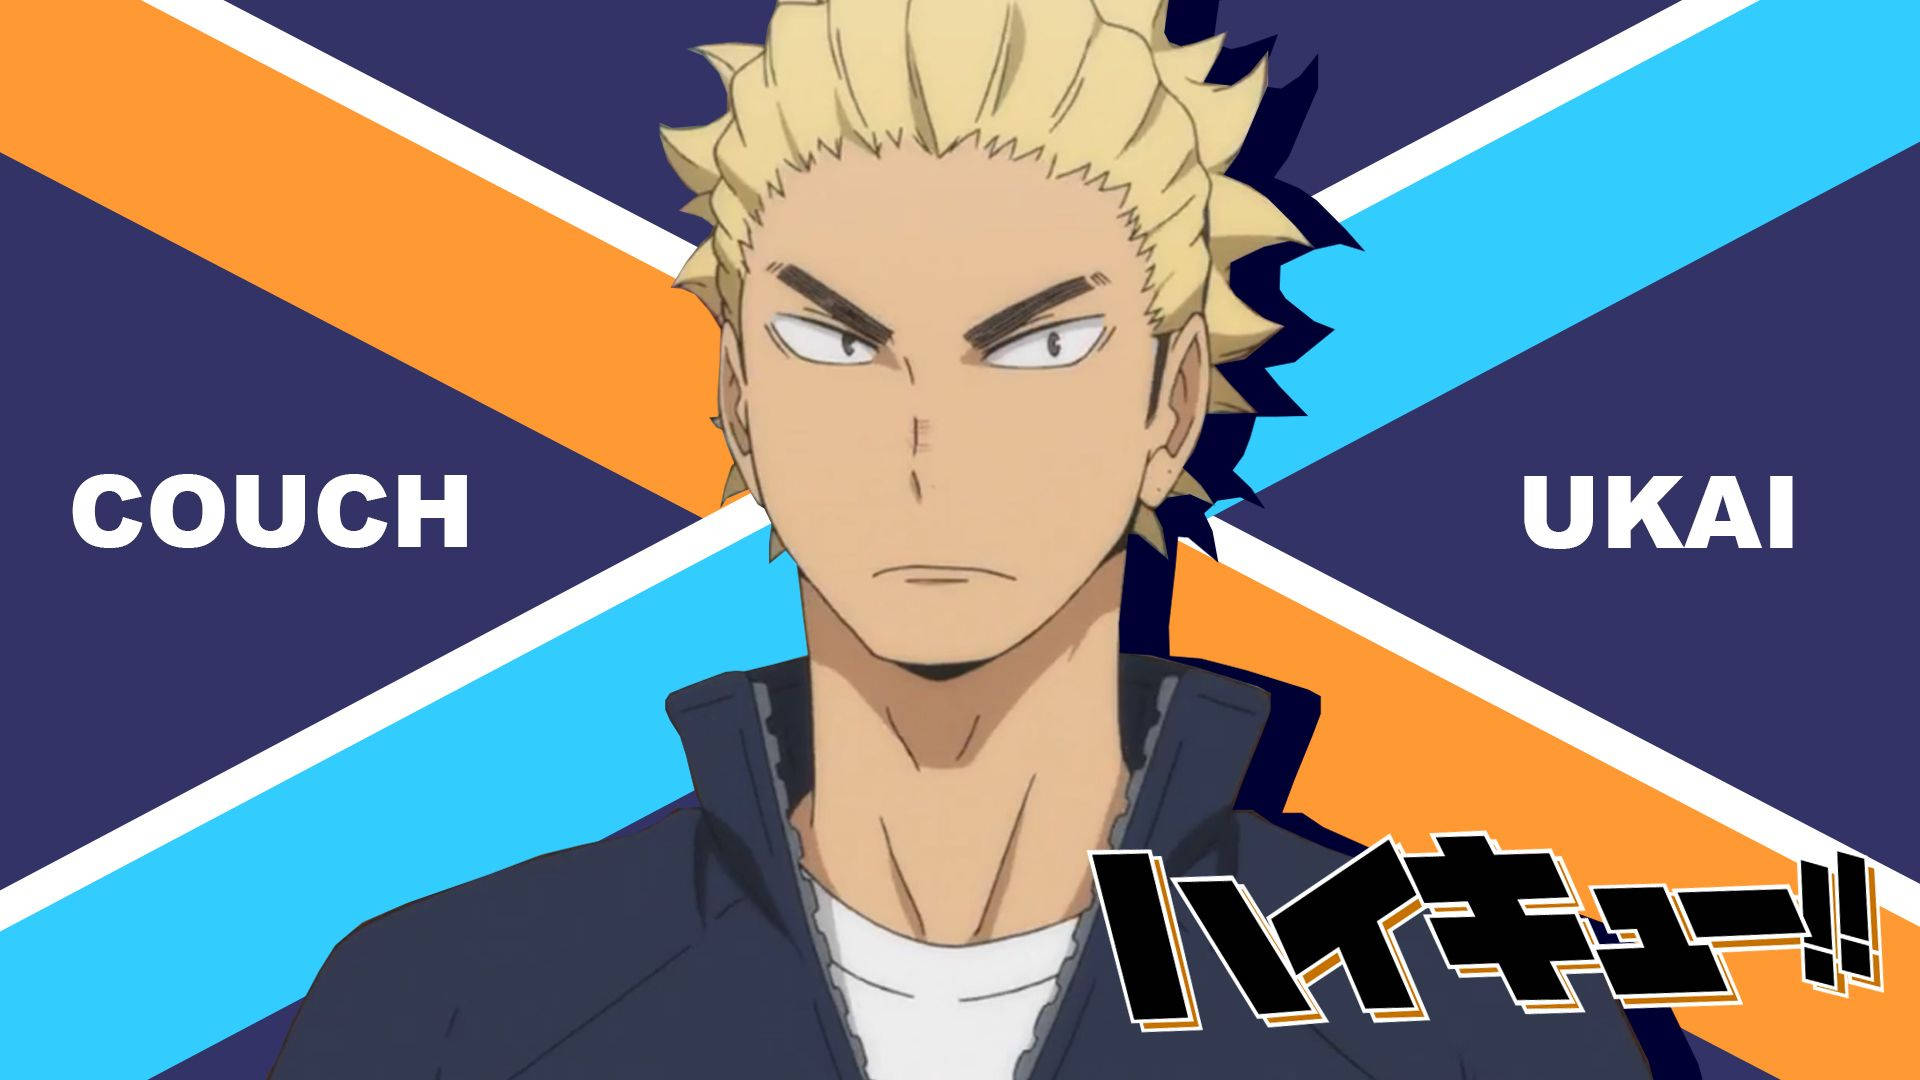 Coach Ukai gives his best advice while guiding Karasuno to victory. Wallpaper